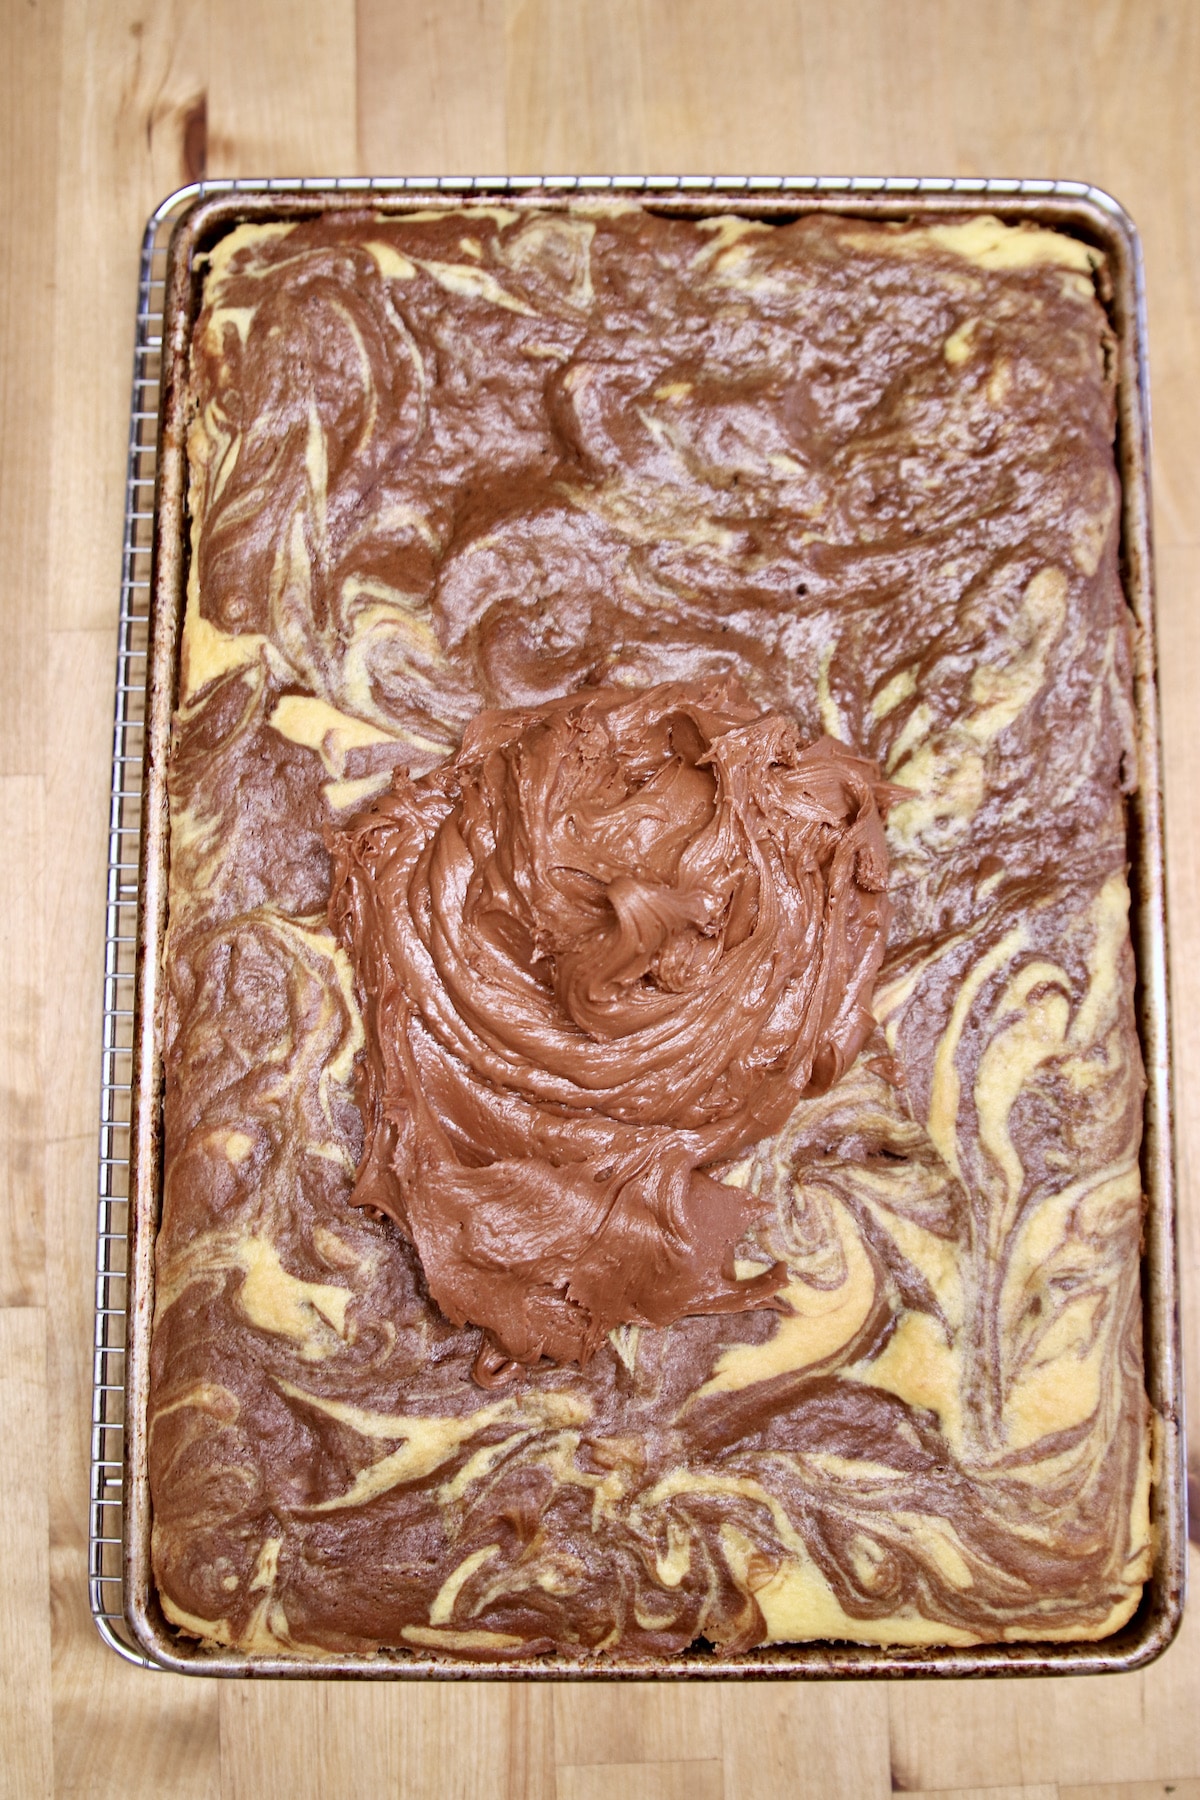 chocolate frosting on marble cake.